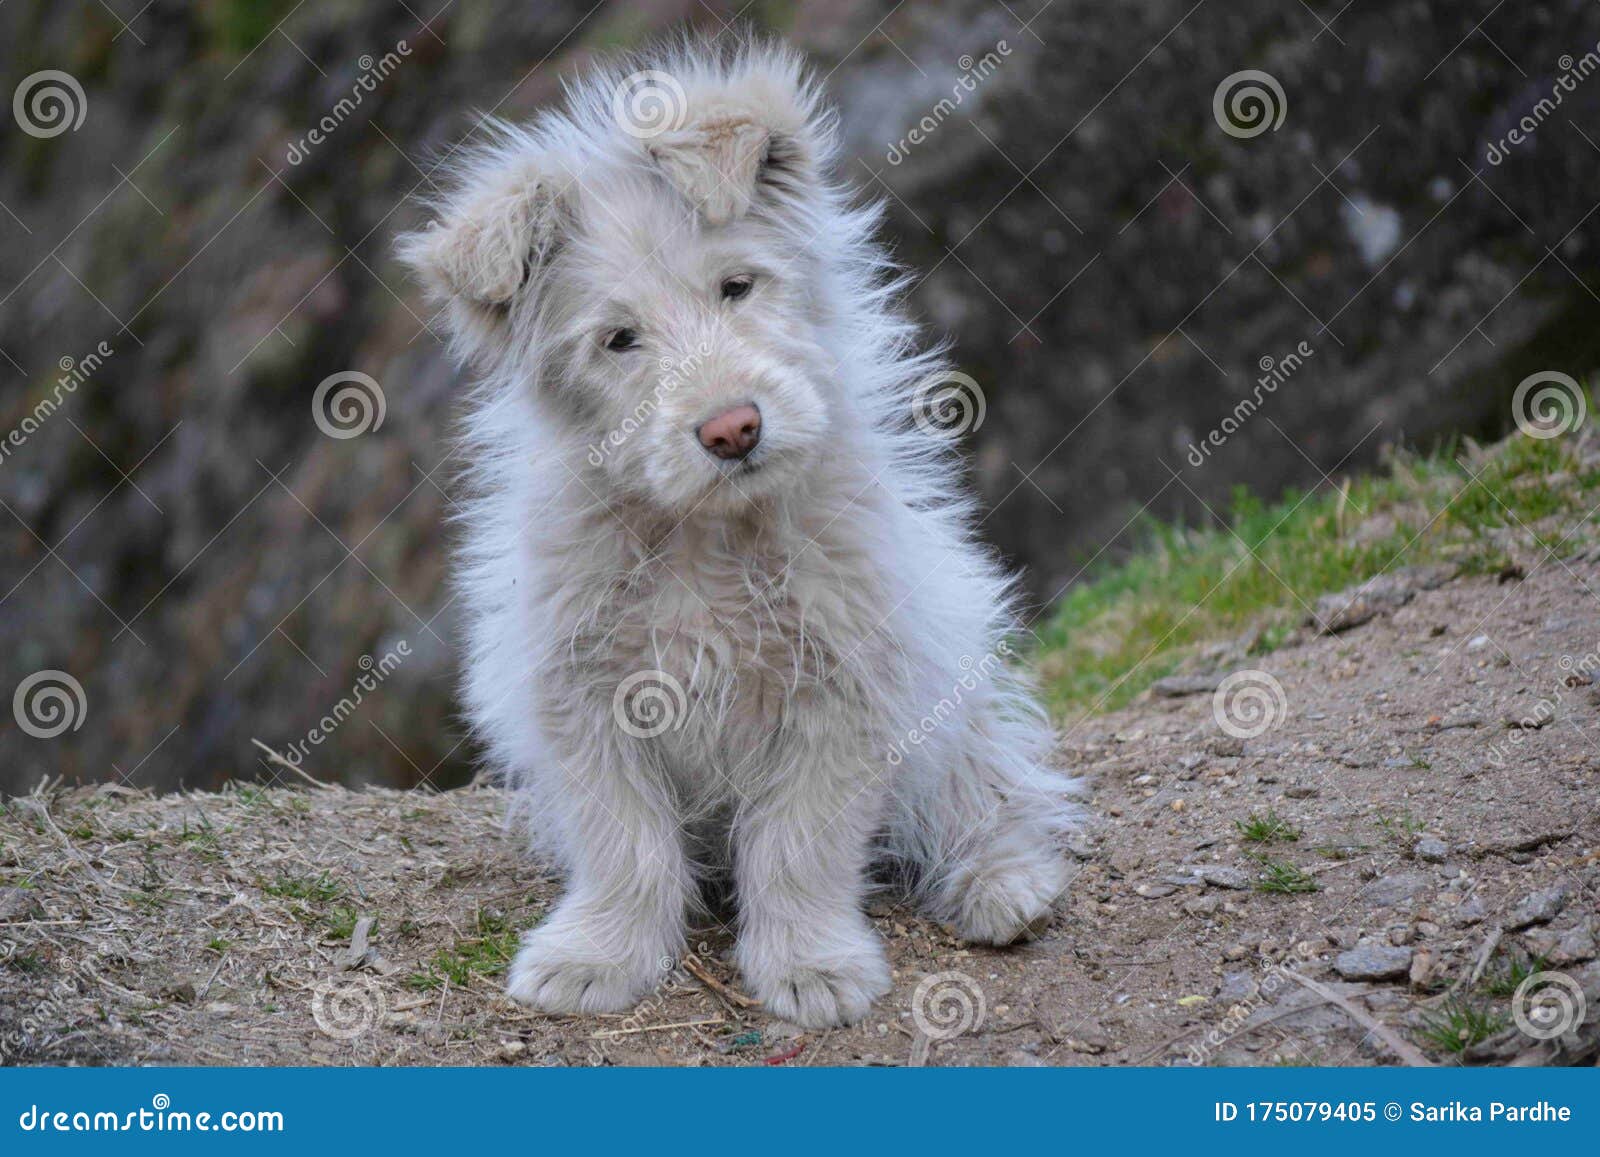 Cute Xiasi Dog In Forest Stock Image Image Of Rishikesh 175079405